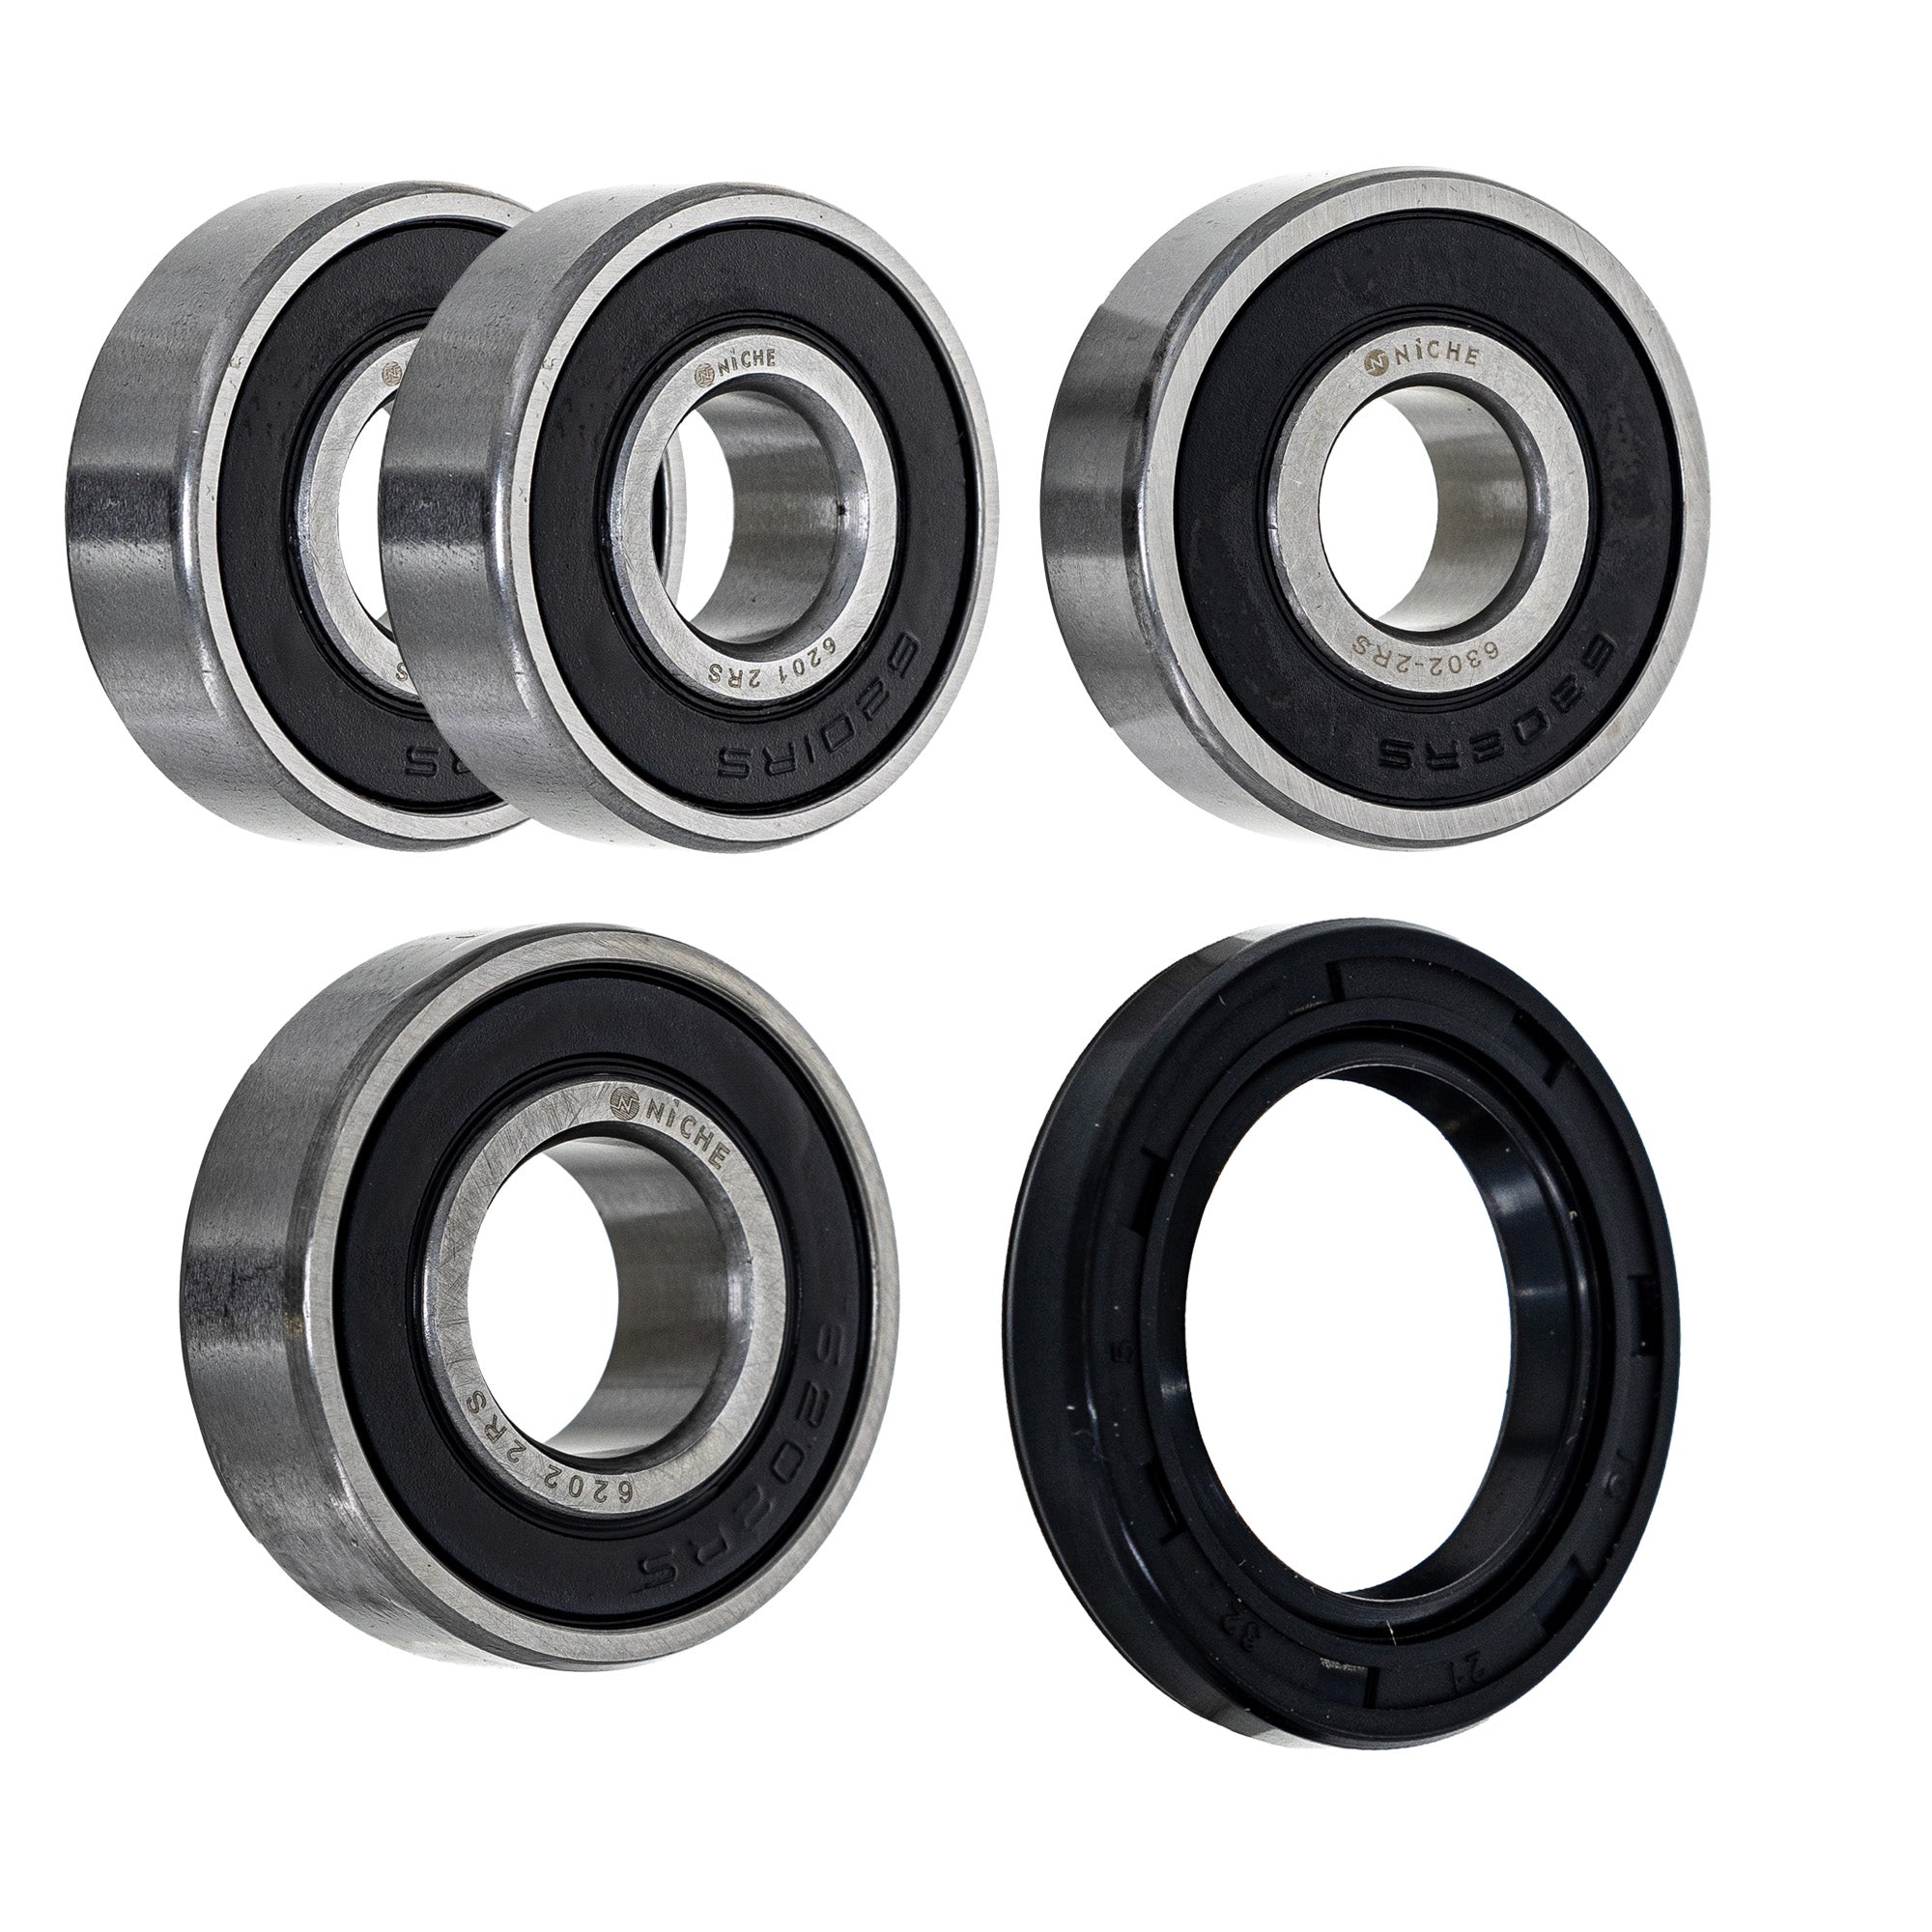 Wheel Bearing Seal Kit for zOTHER Ref No DR200SE DR200S NICHE MK1008746